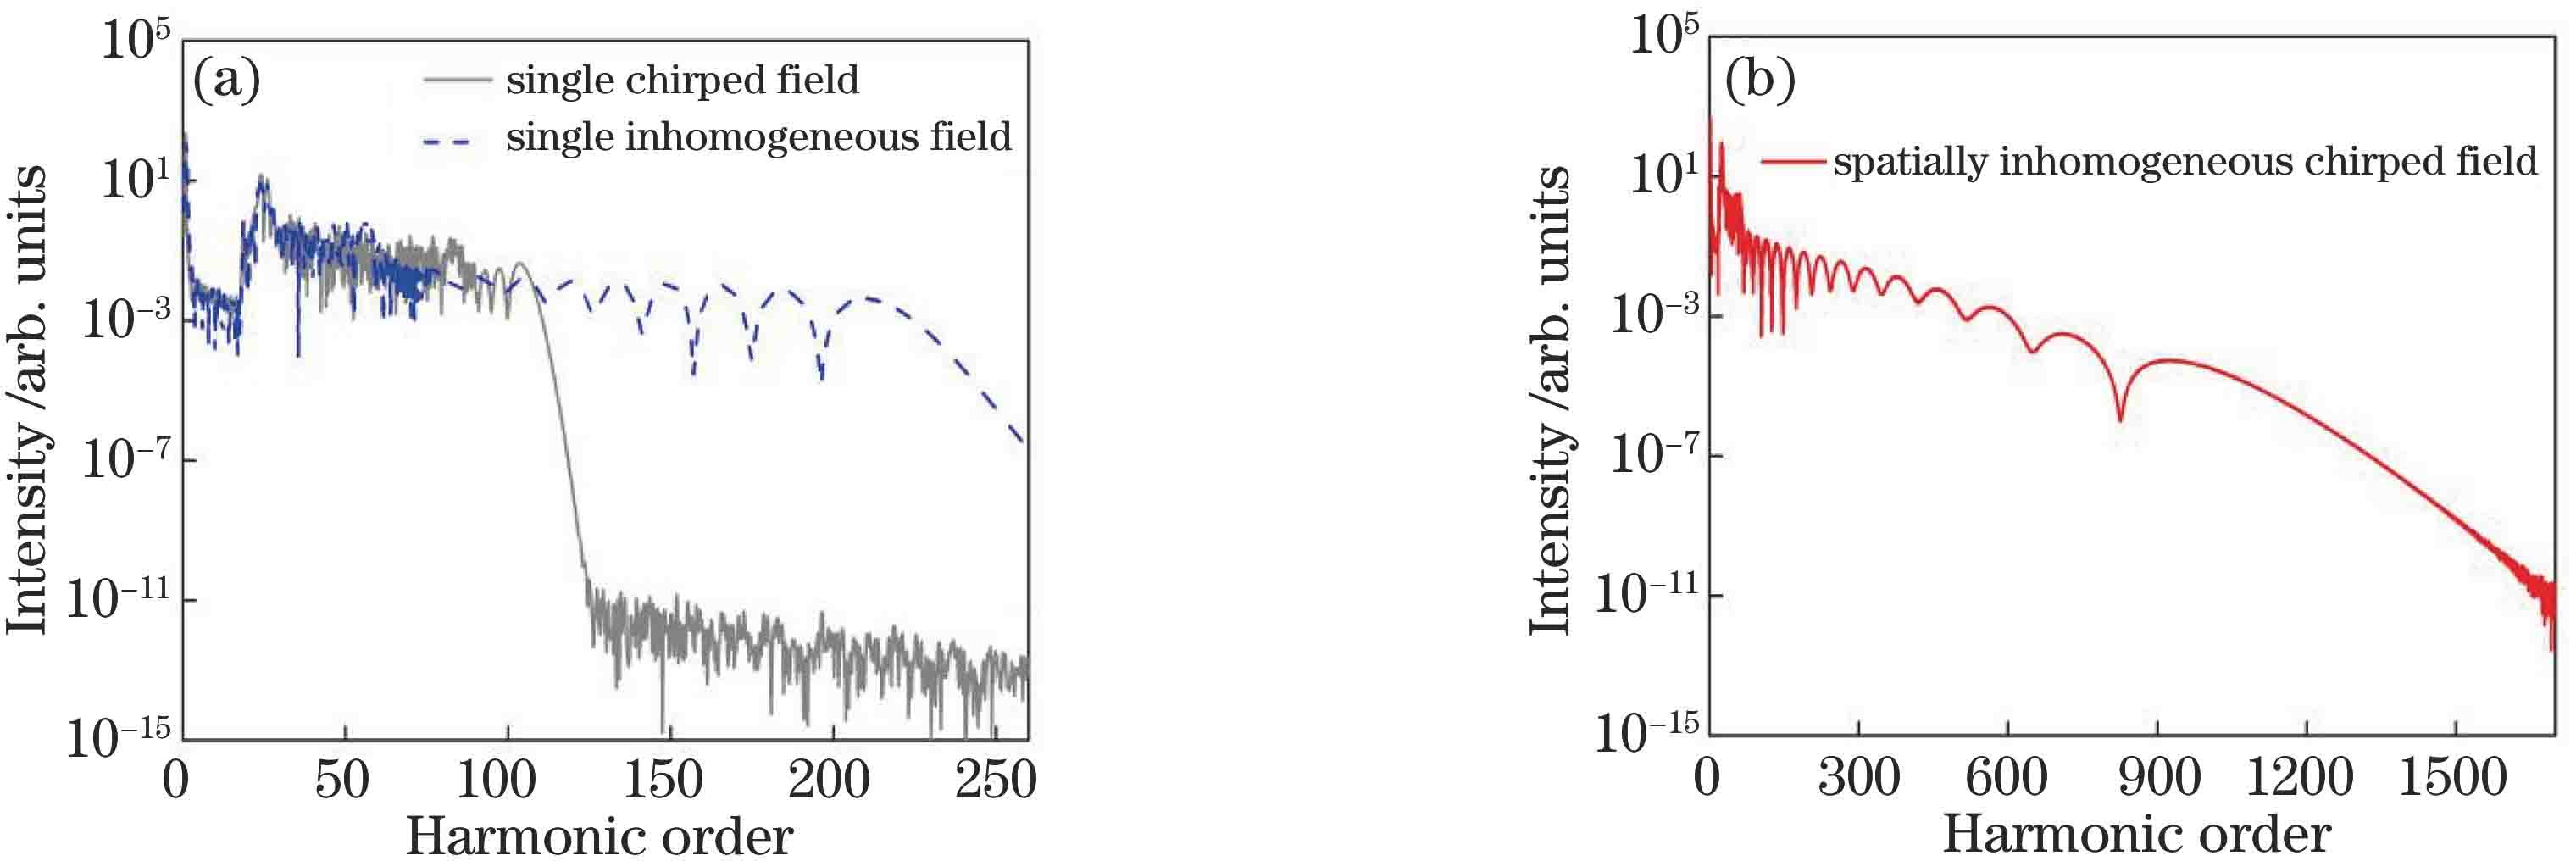 Harmonic spectra of He+ driven by different laser fields. (a) Chirped and spatially inhomogeneous fields; (b) spatially inhomogeneous chirped field